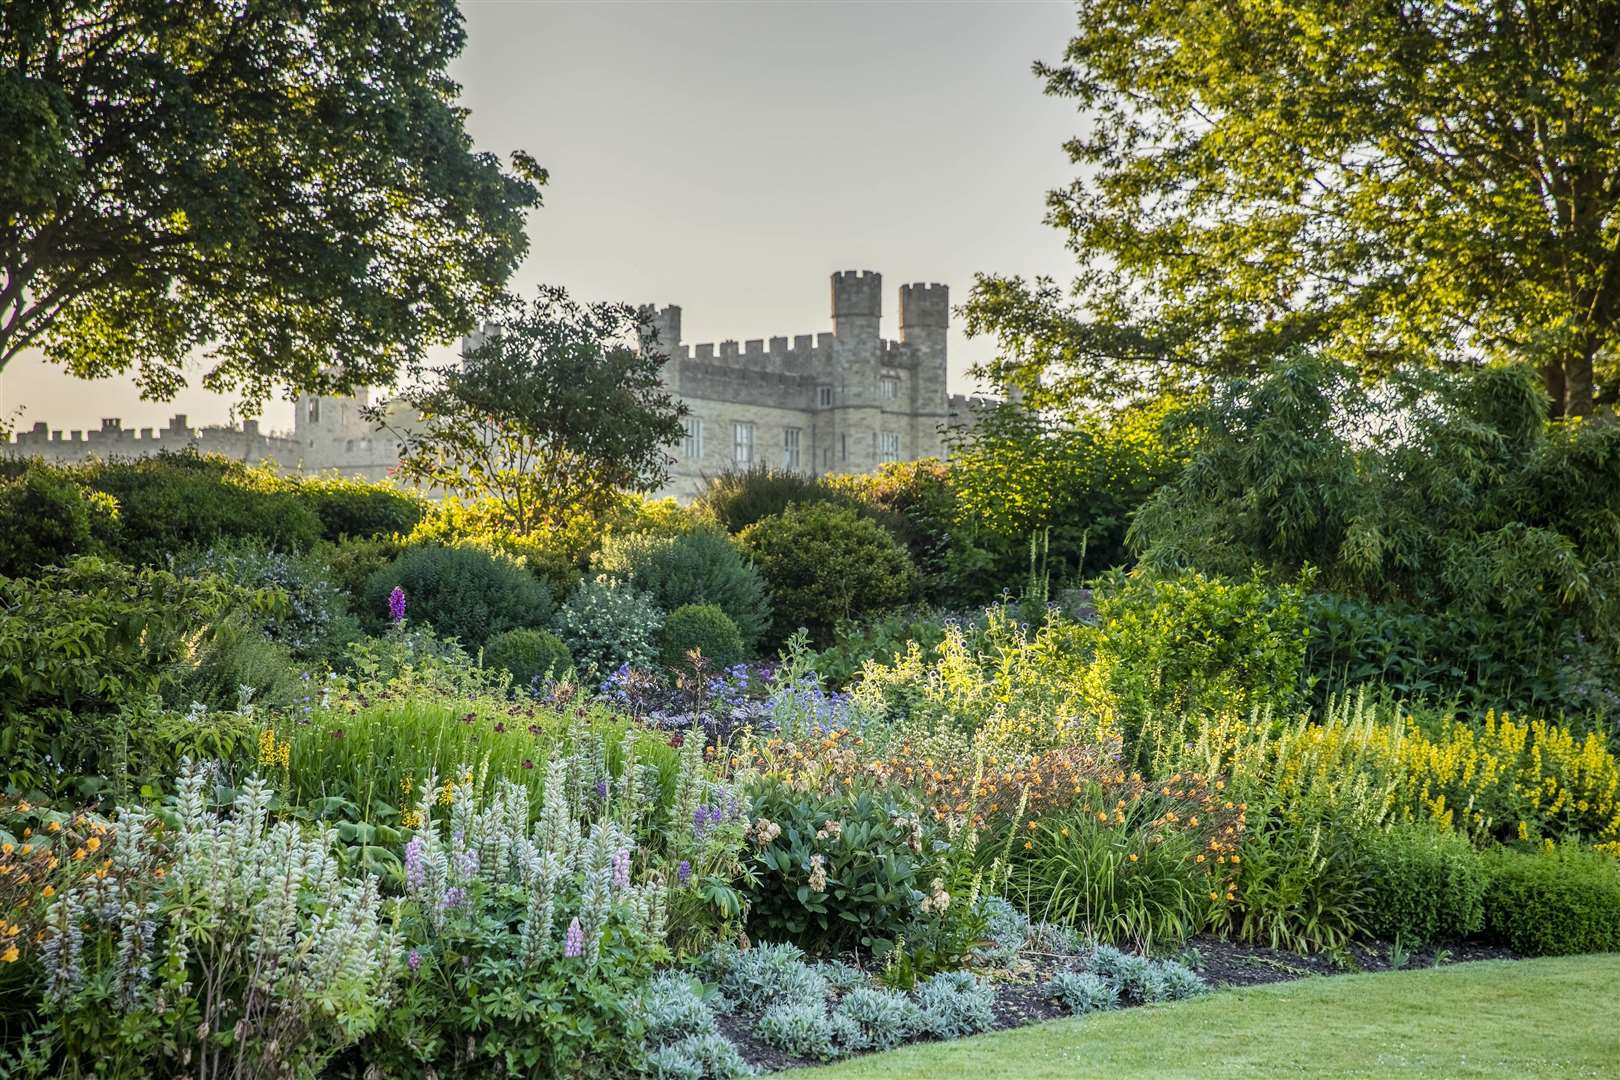 Follow the trail around the beautiful grounds of Leeds Castle. Picture: Thomas Alexander